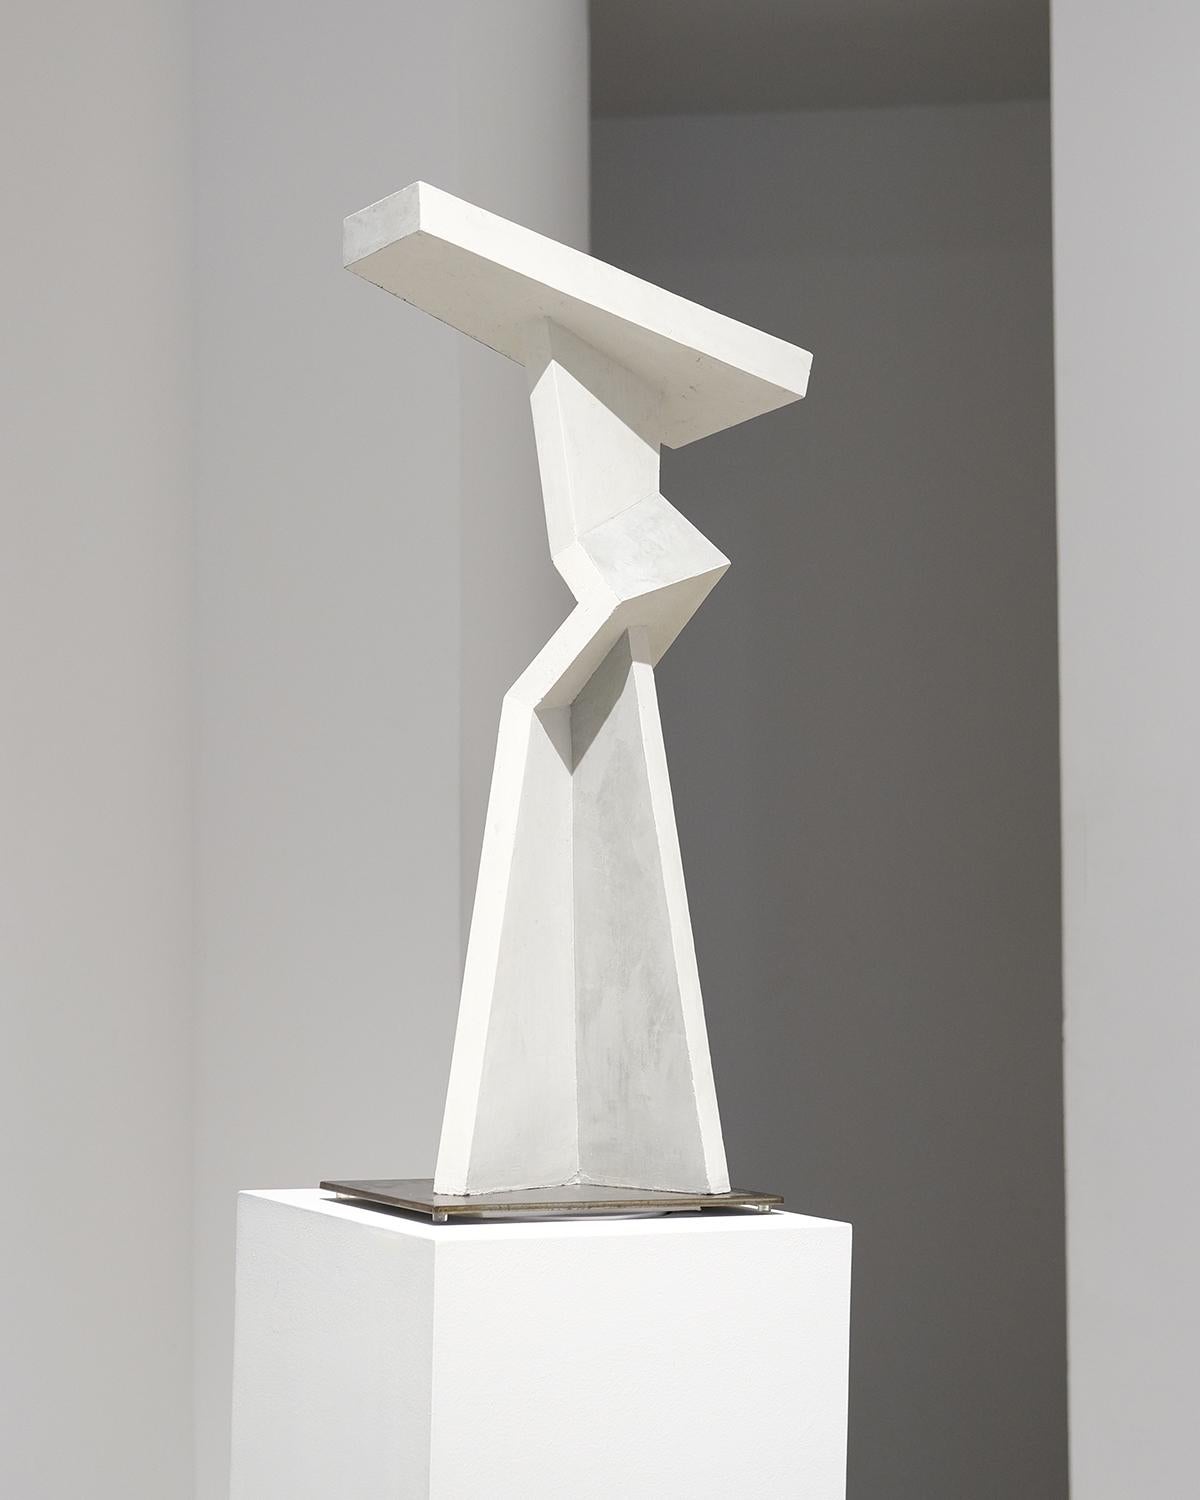 She Carried Water (Minimalist Standing Sculpture in Shades of White and Gray) For Sale 4